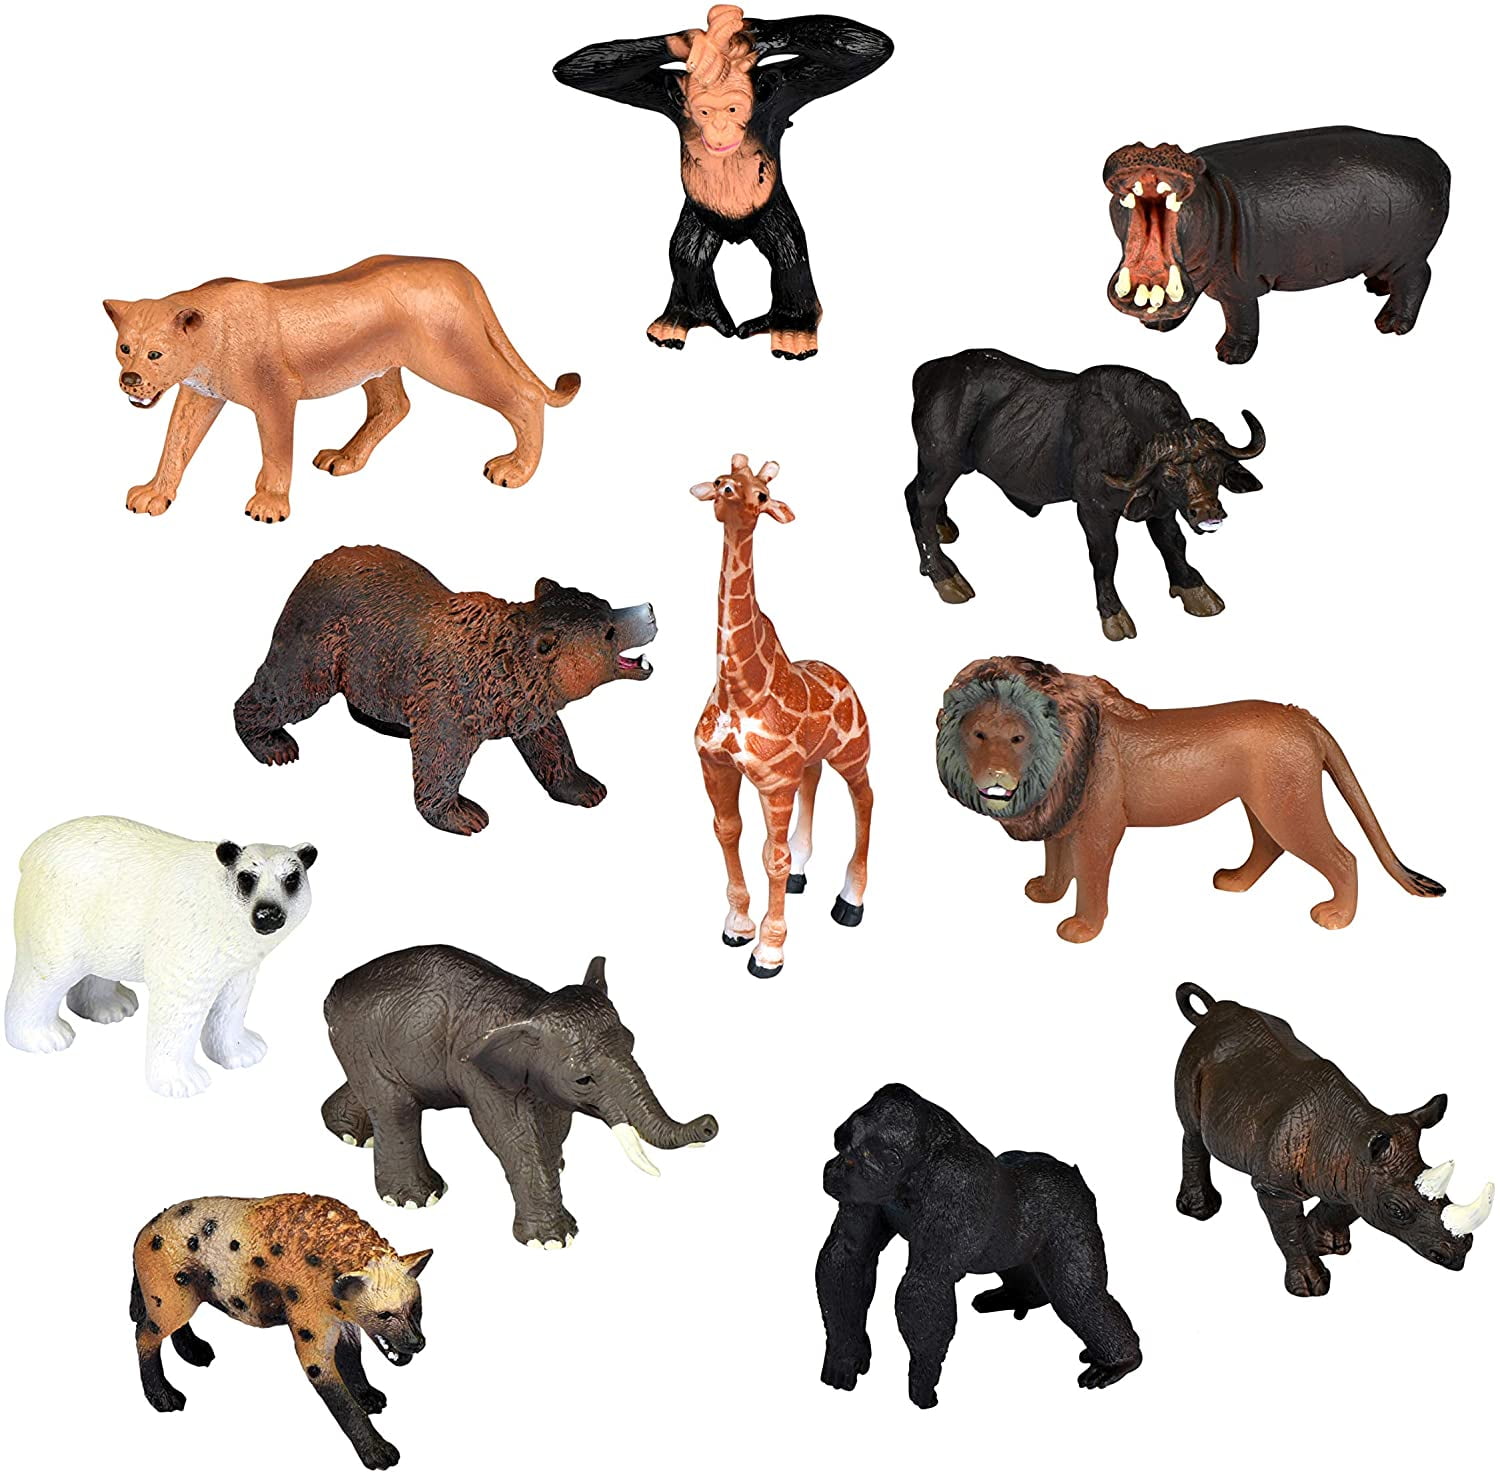 Realistic Animal Figures Animal Play Sets Toys for Children Party Favors 